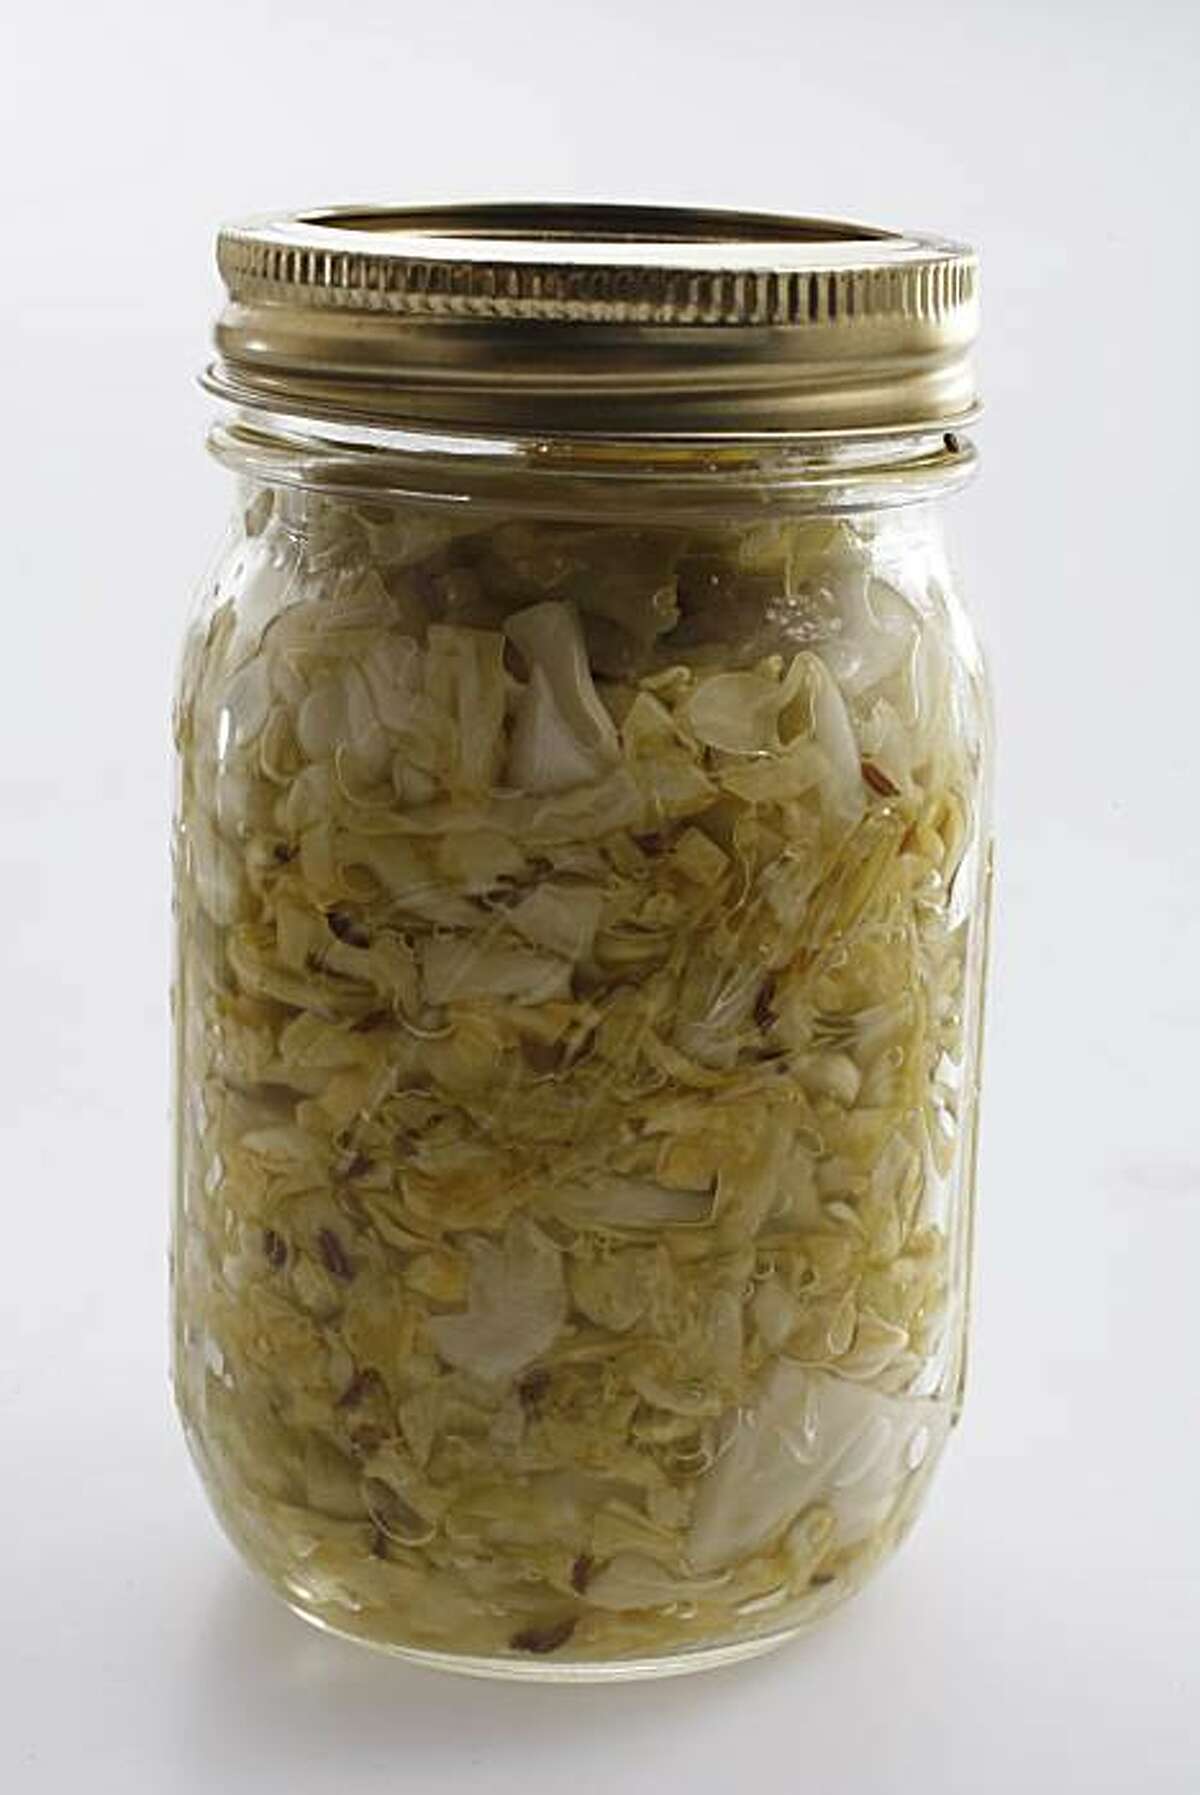 Fermenting Foods for fermenting include sauerkraut photographed on Thursday, May 28, 2009. Food Styling by Shannon Shafer.